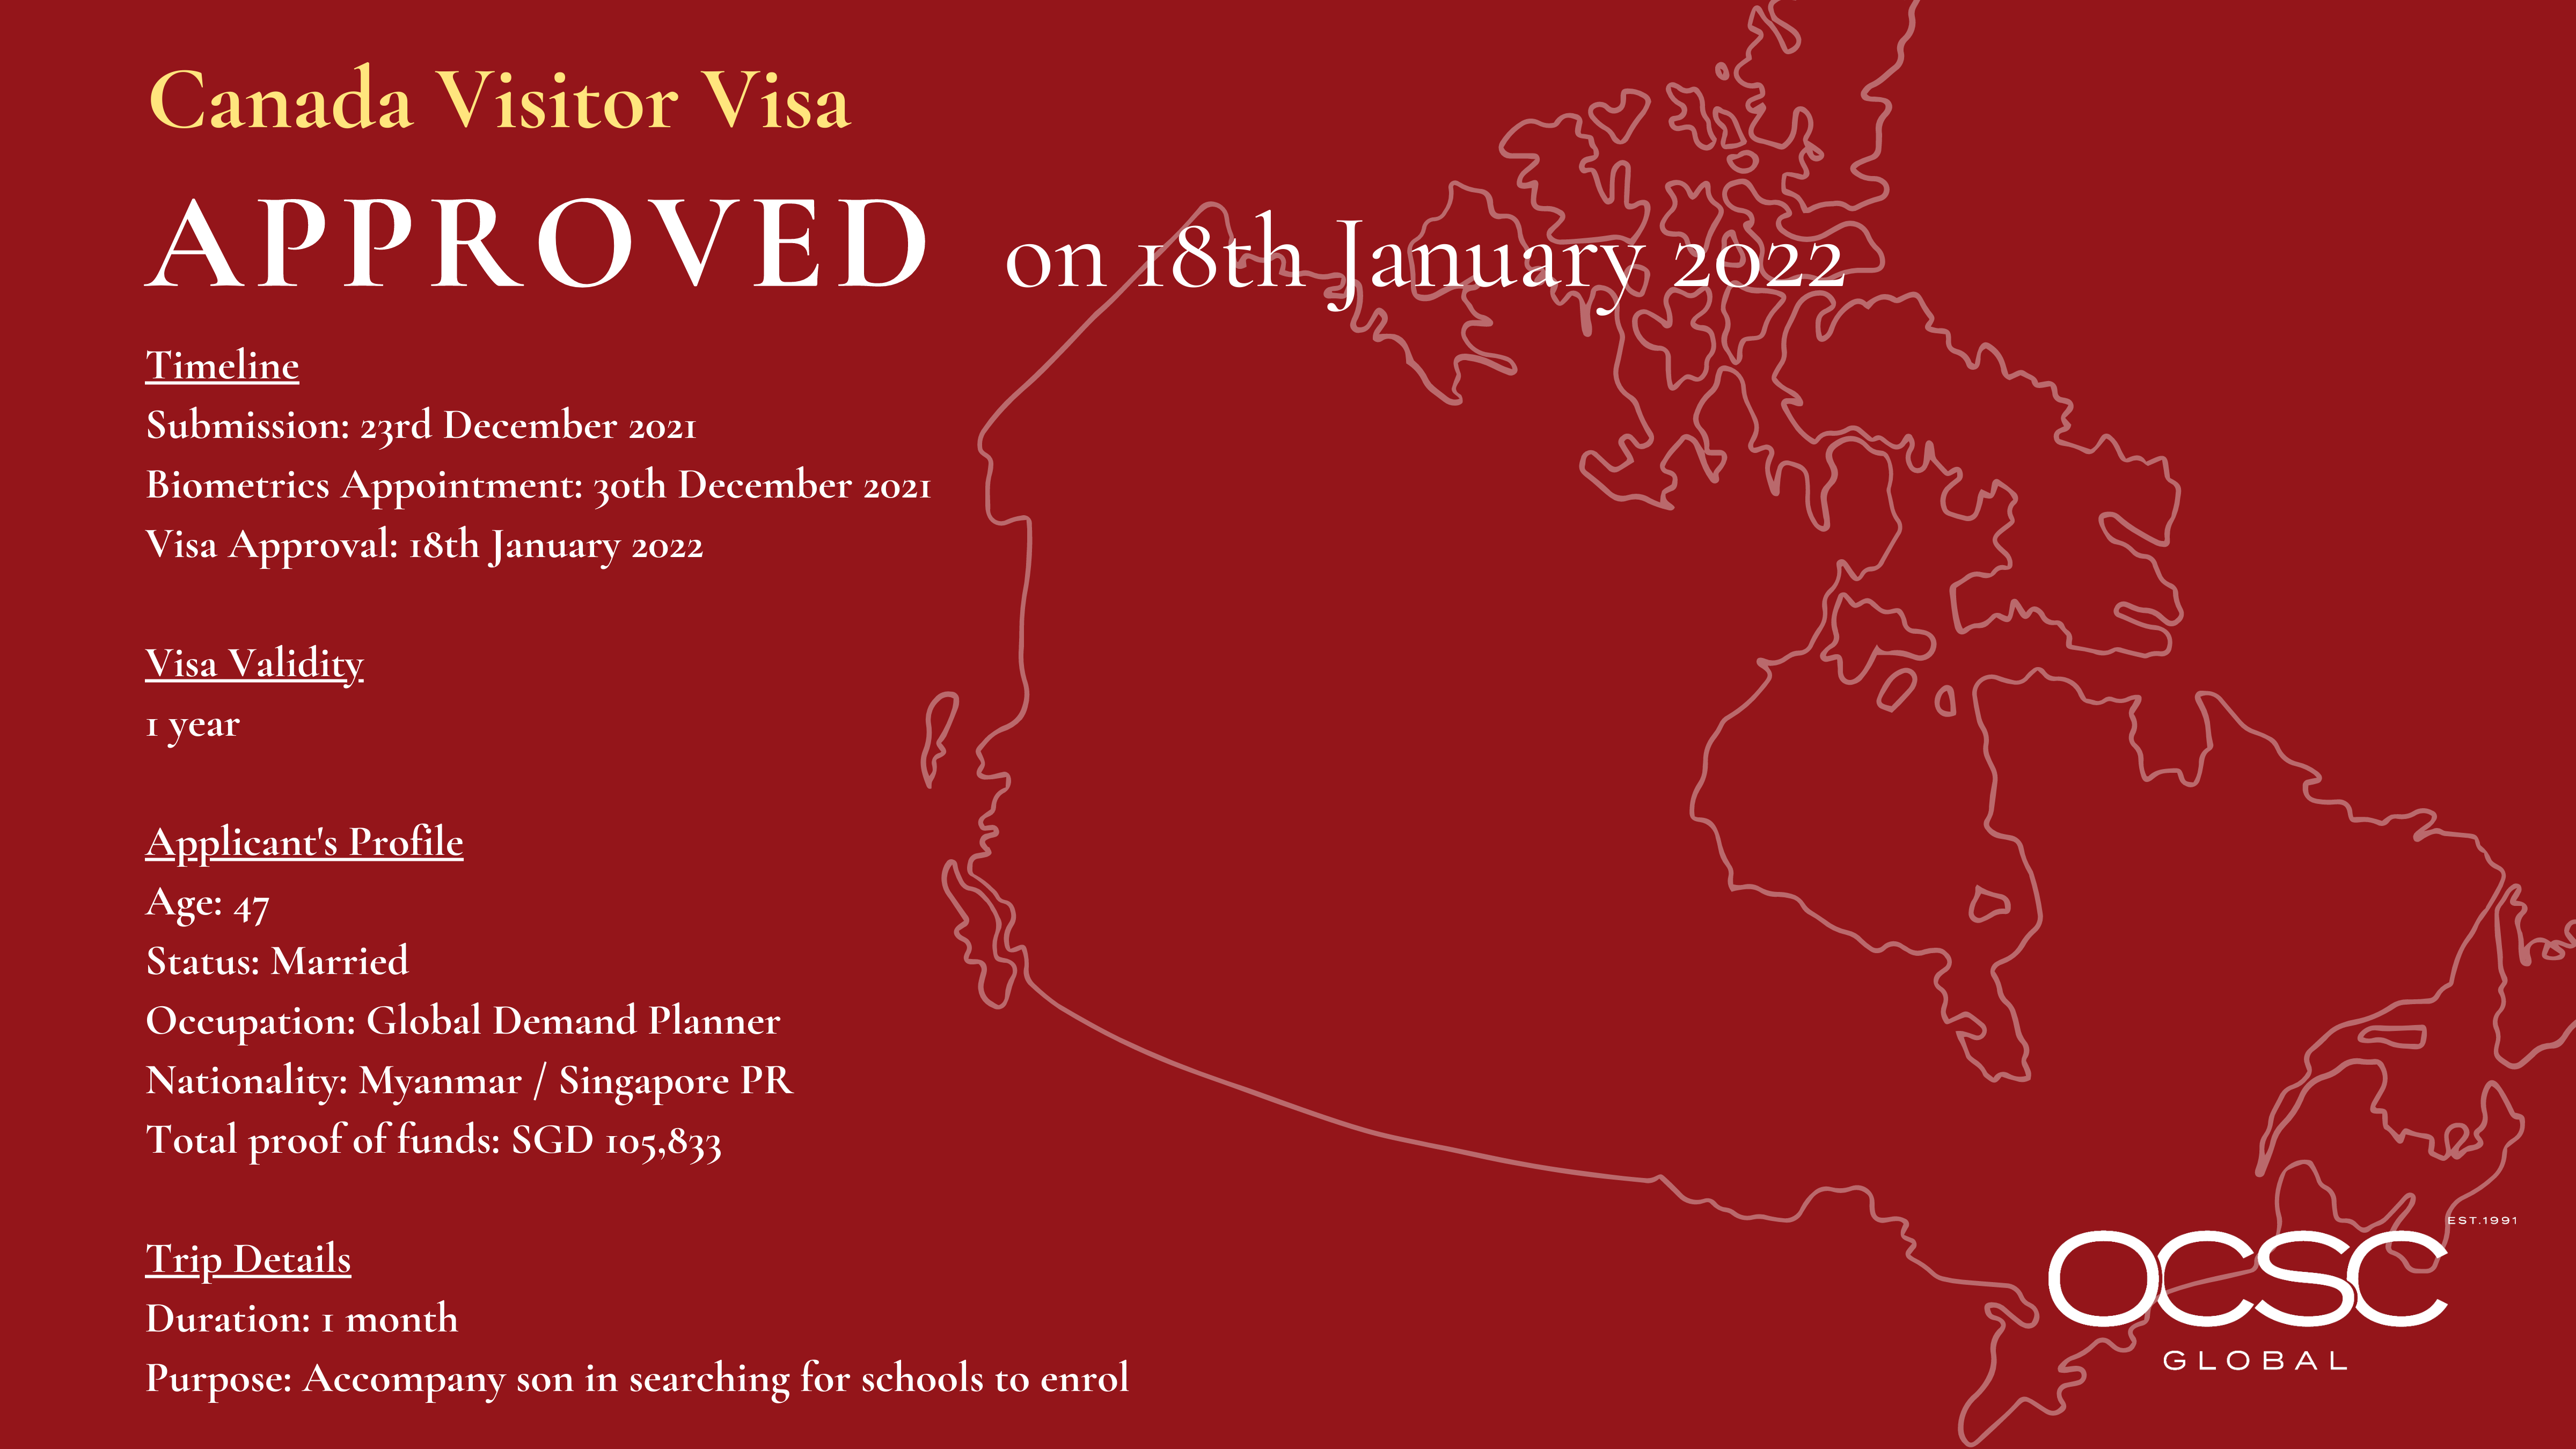 Approval for Canada Visitor Visa